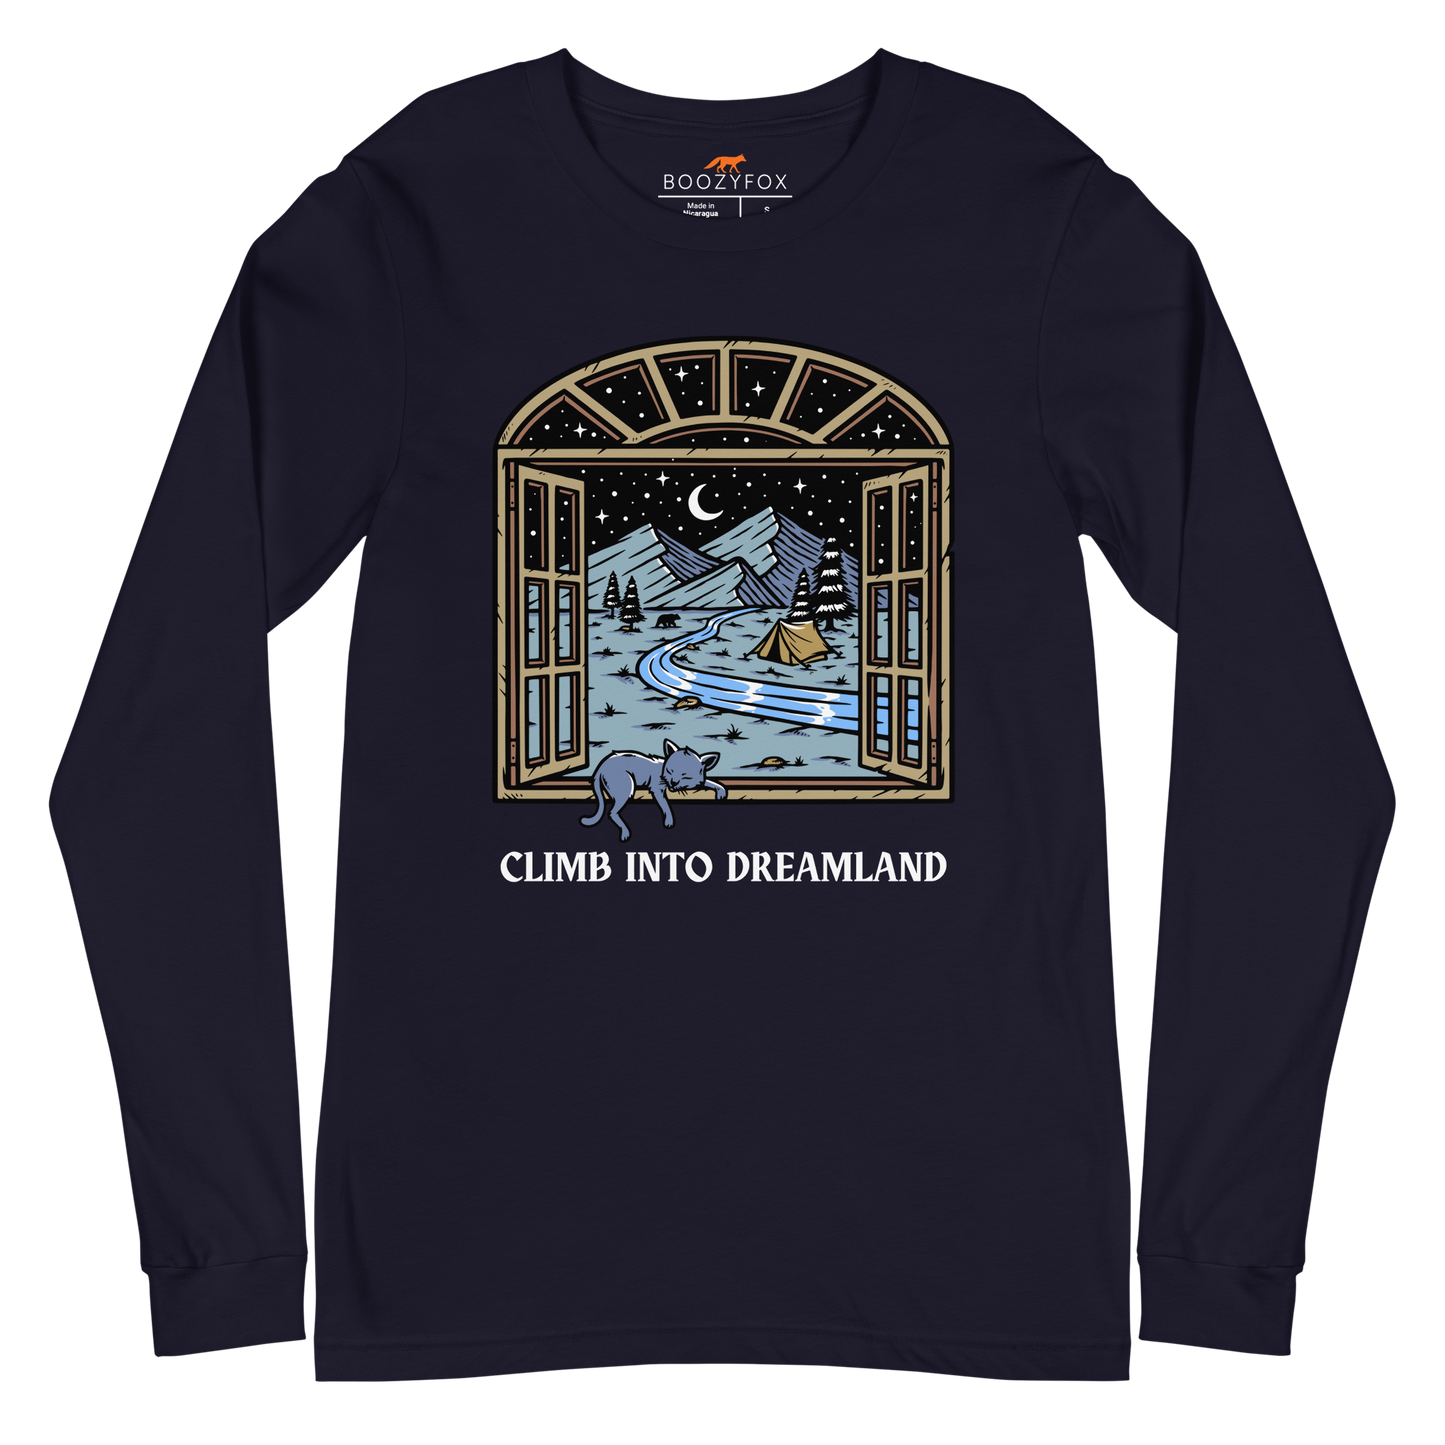 Navy Climb Into Dreamland Long Sleeve Tee featuring a mesmerizing mountain view graphic on the chest - Cool Nature Long Sleeve Graphic Tees - Boozy Fox